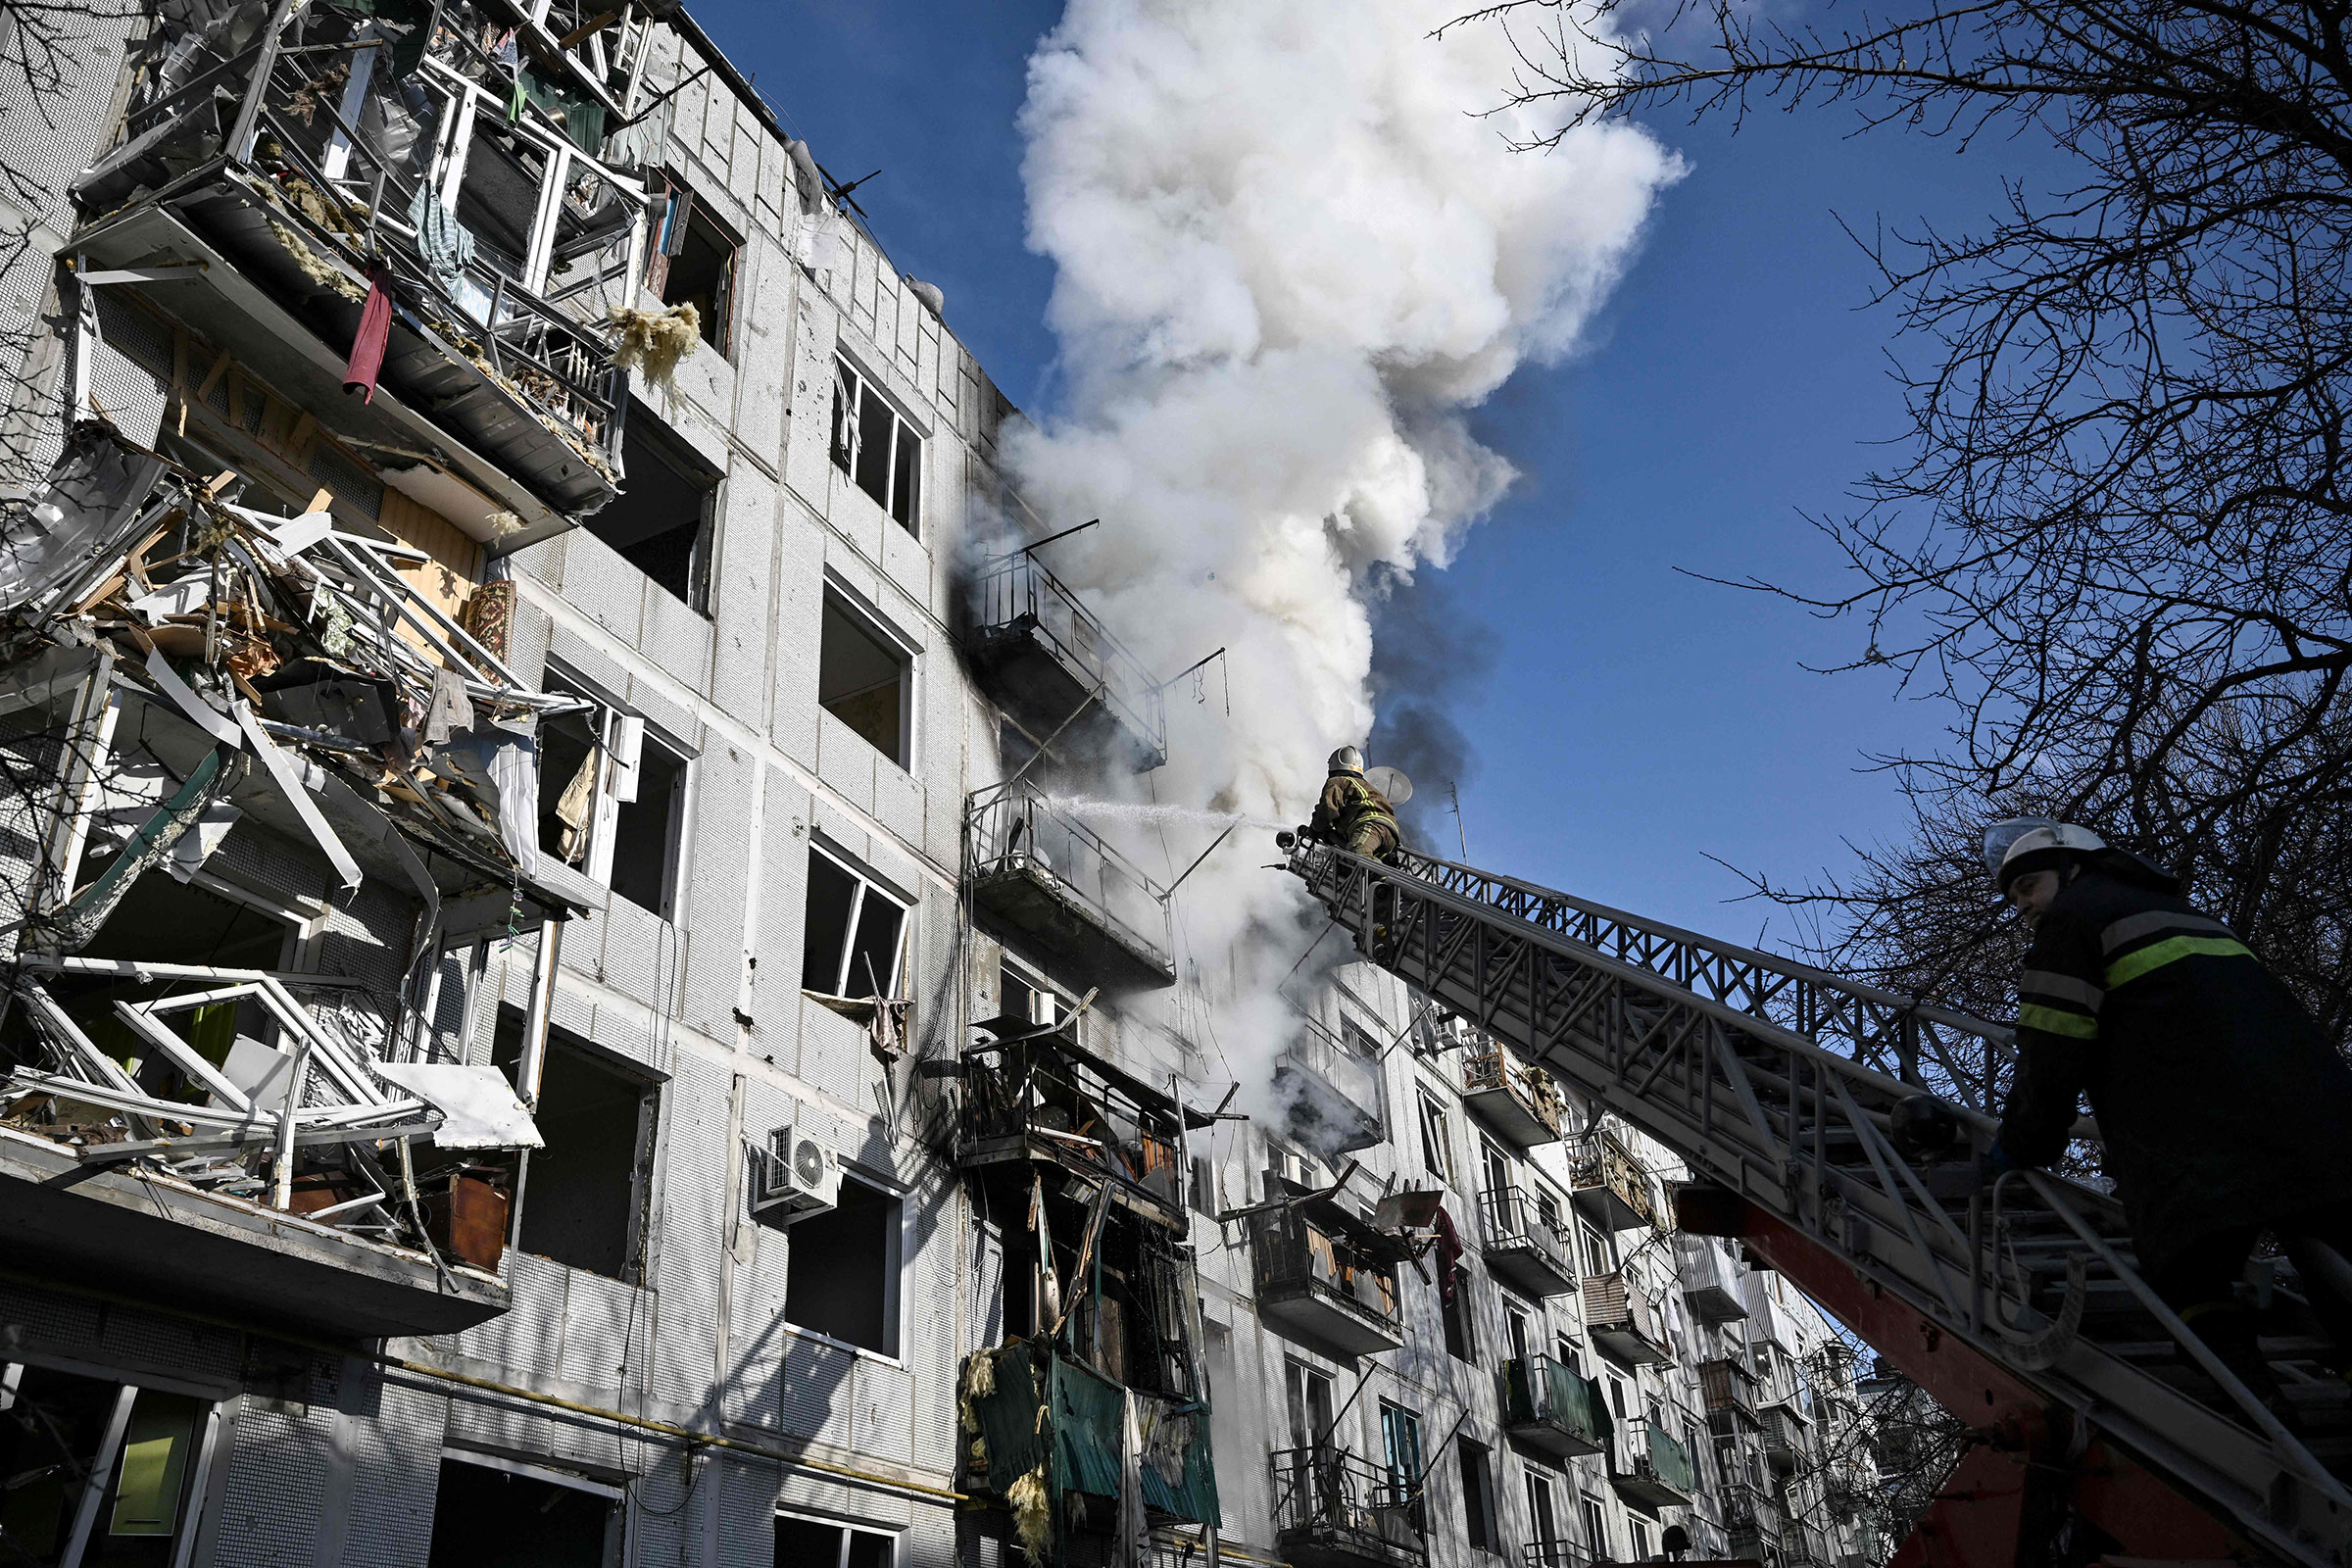 Firefighters work on a building fire after bombings on the eastern Ukraine town of Chuhuiv on Feb. 24, 2022.